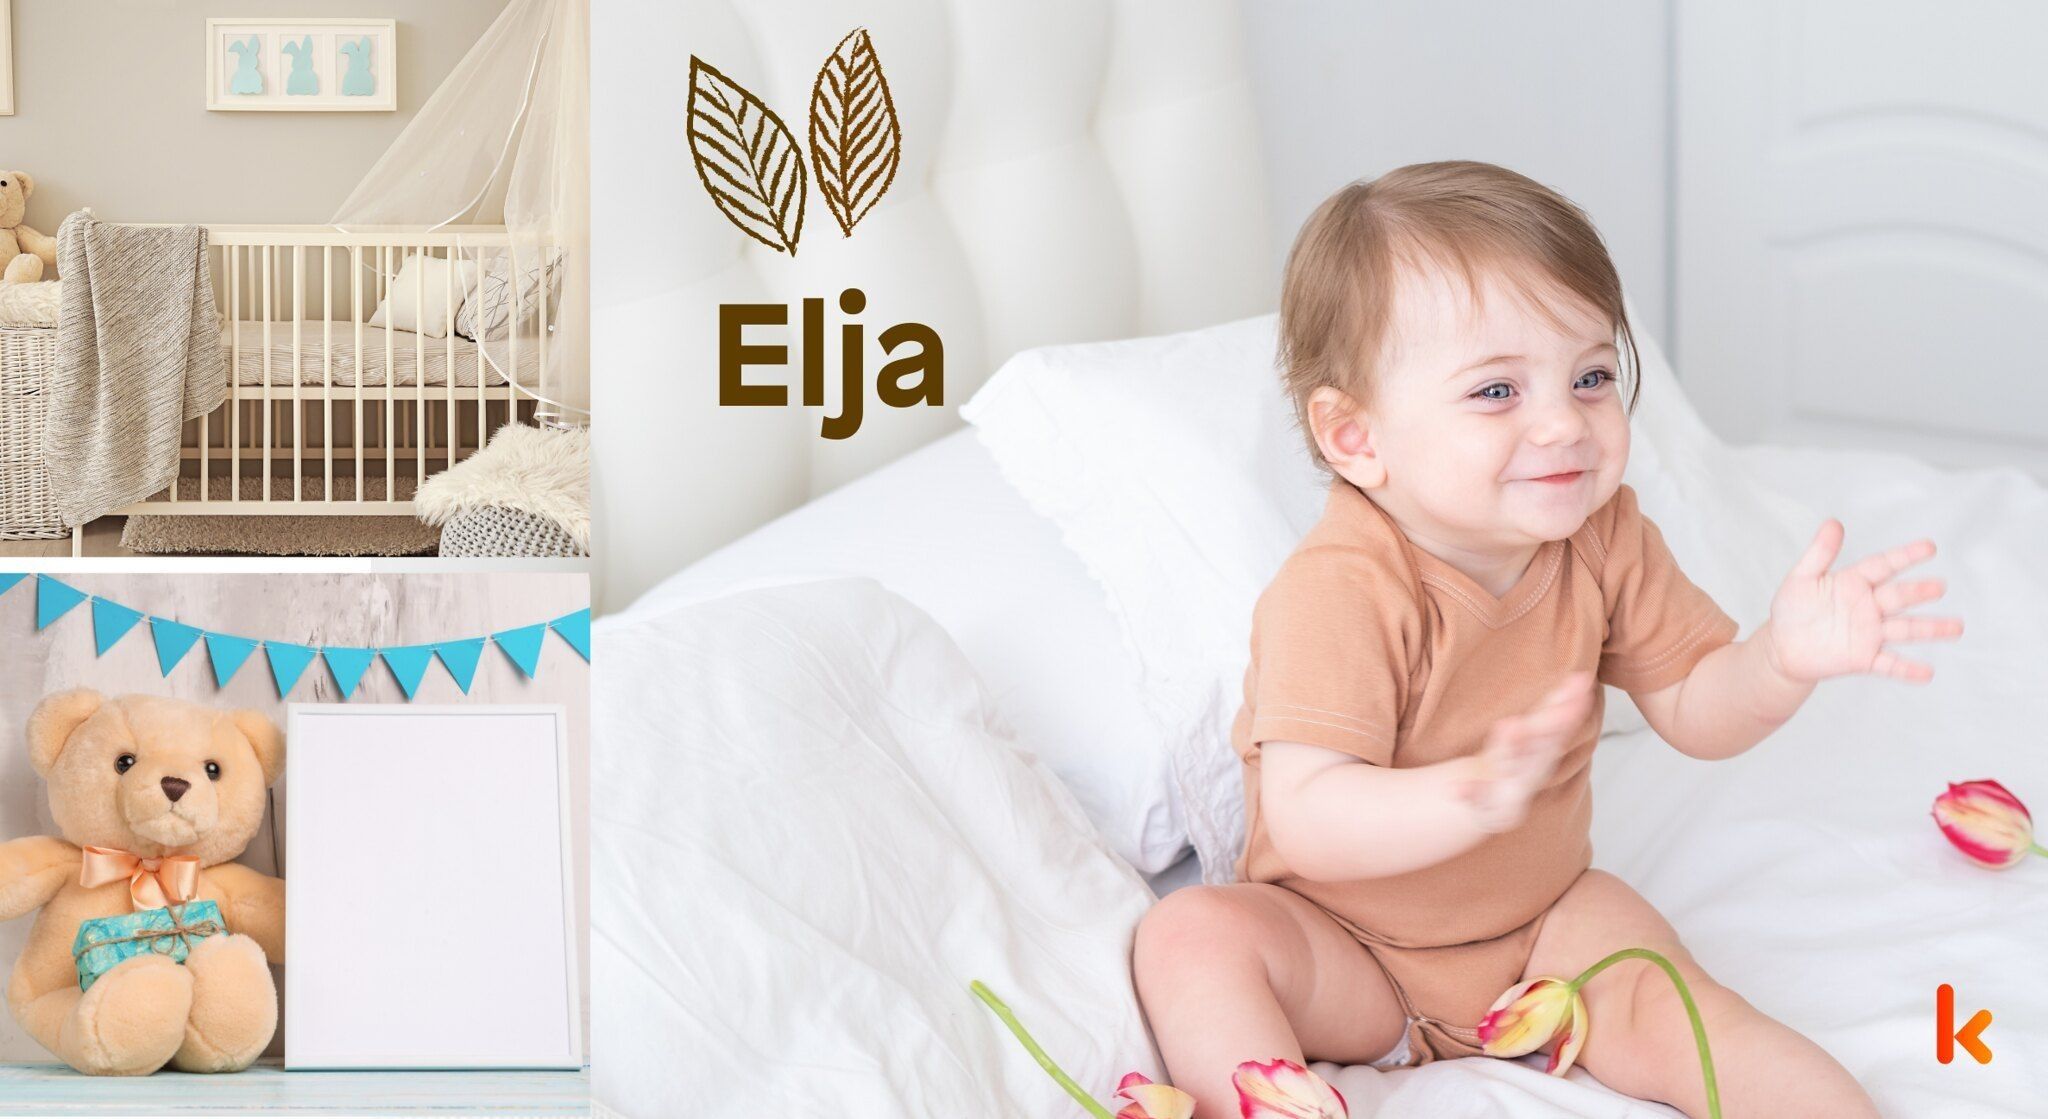 Meaning of the name Elja